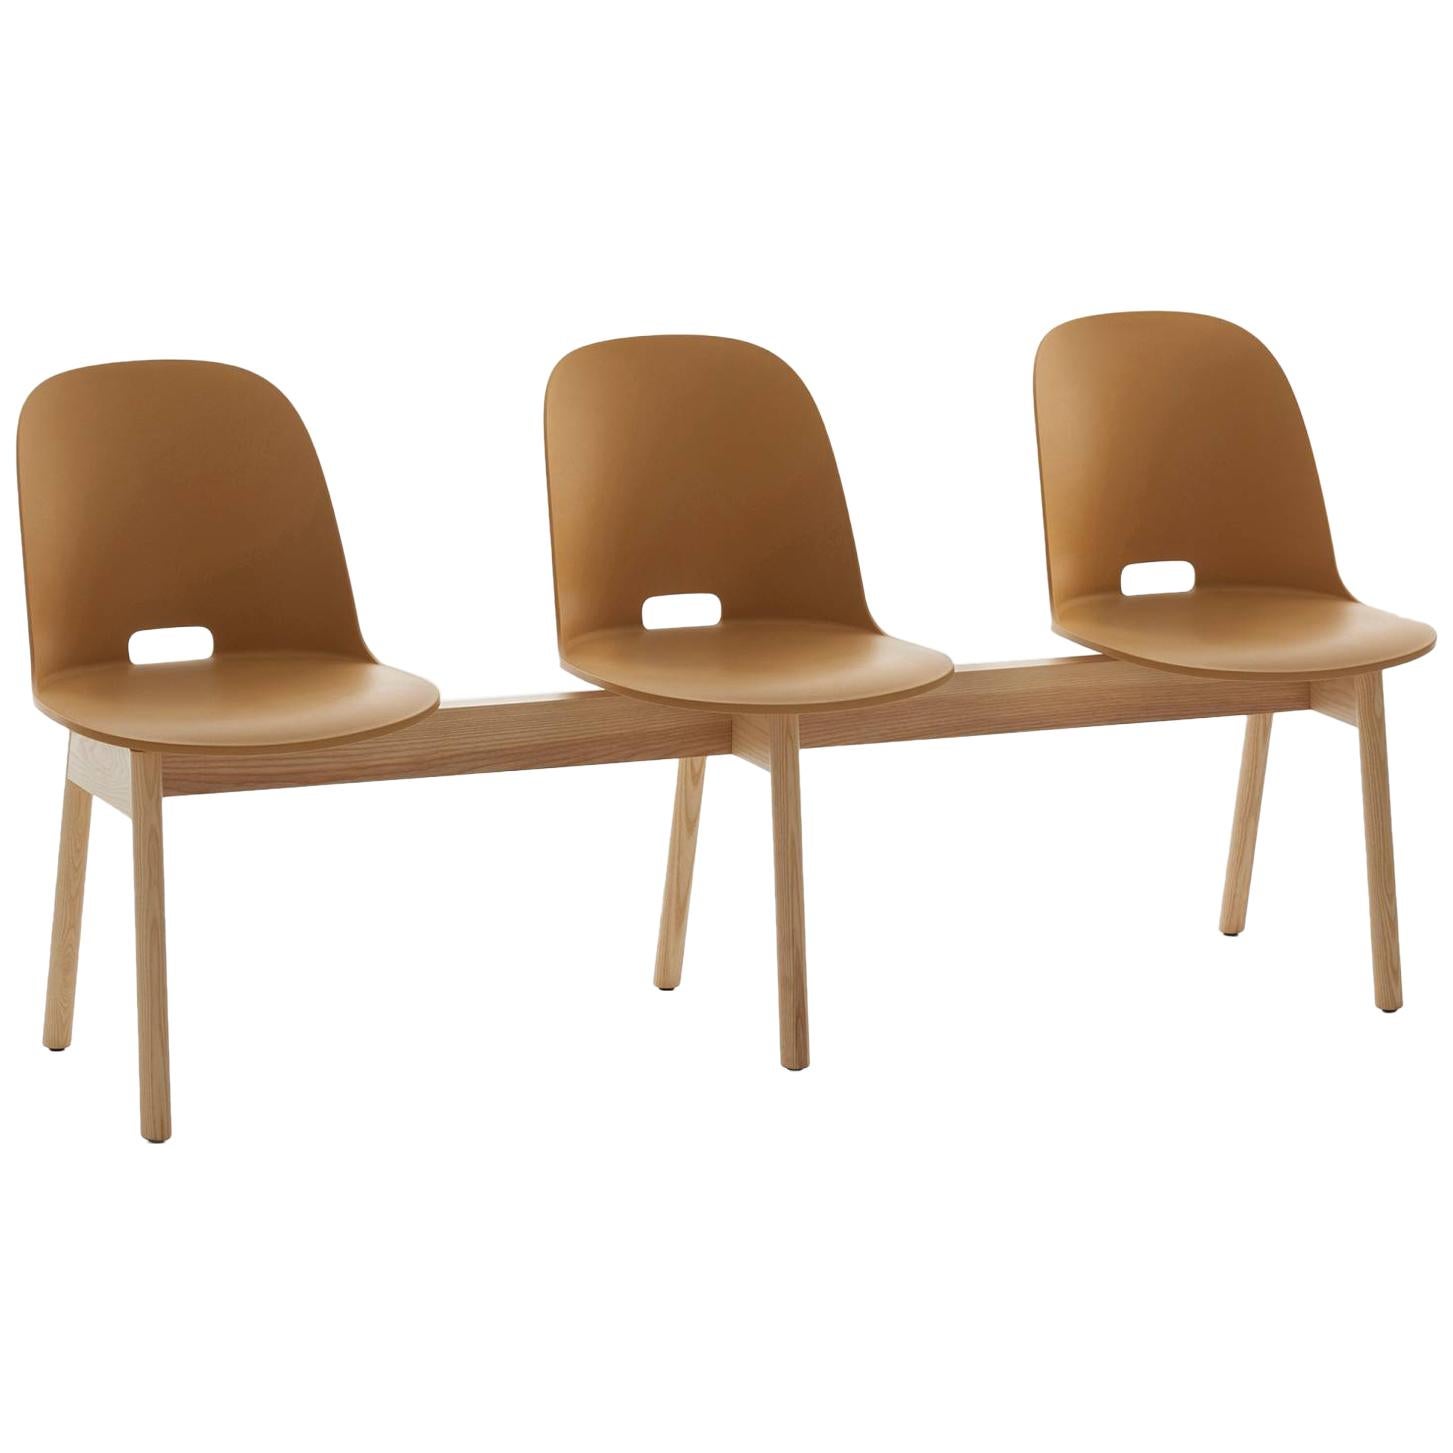 Emeco Alfi 3-Seat Bench in Sand and Ash with High Back by Jasper Morrison